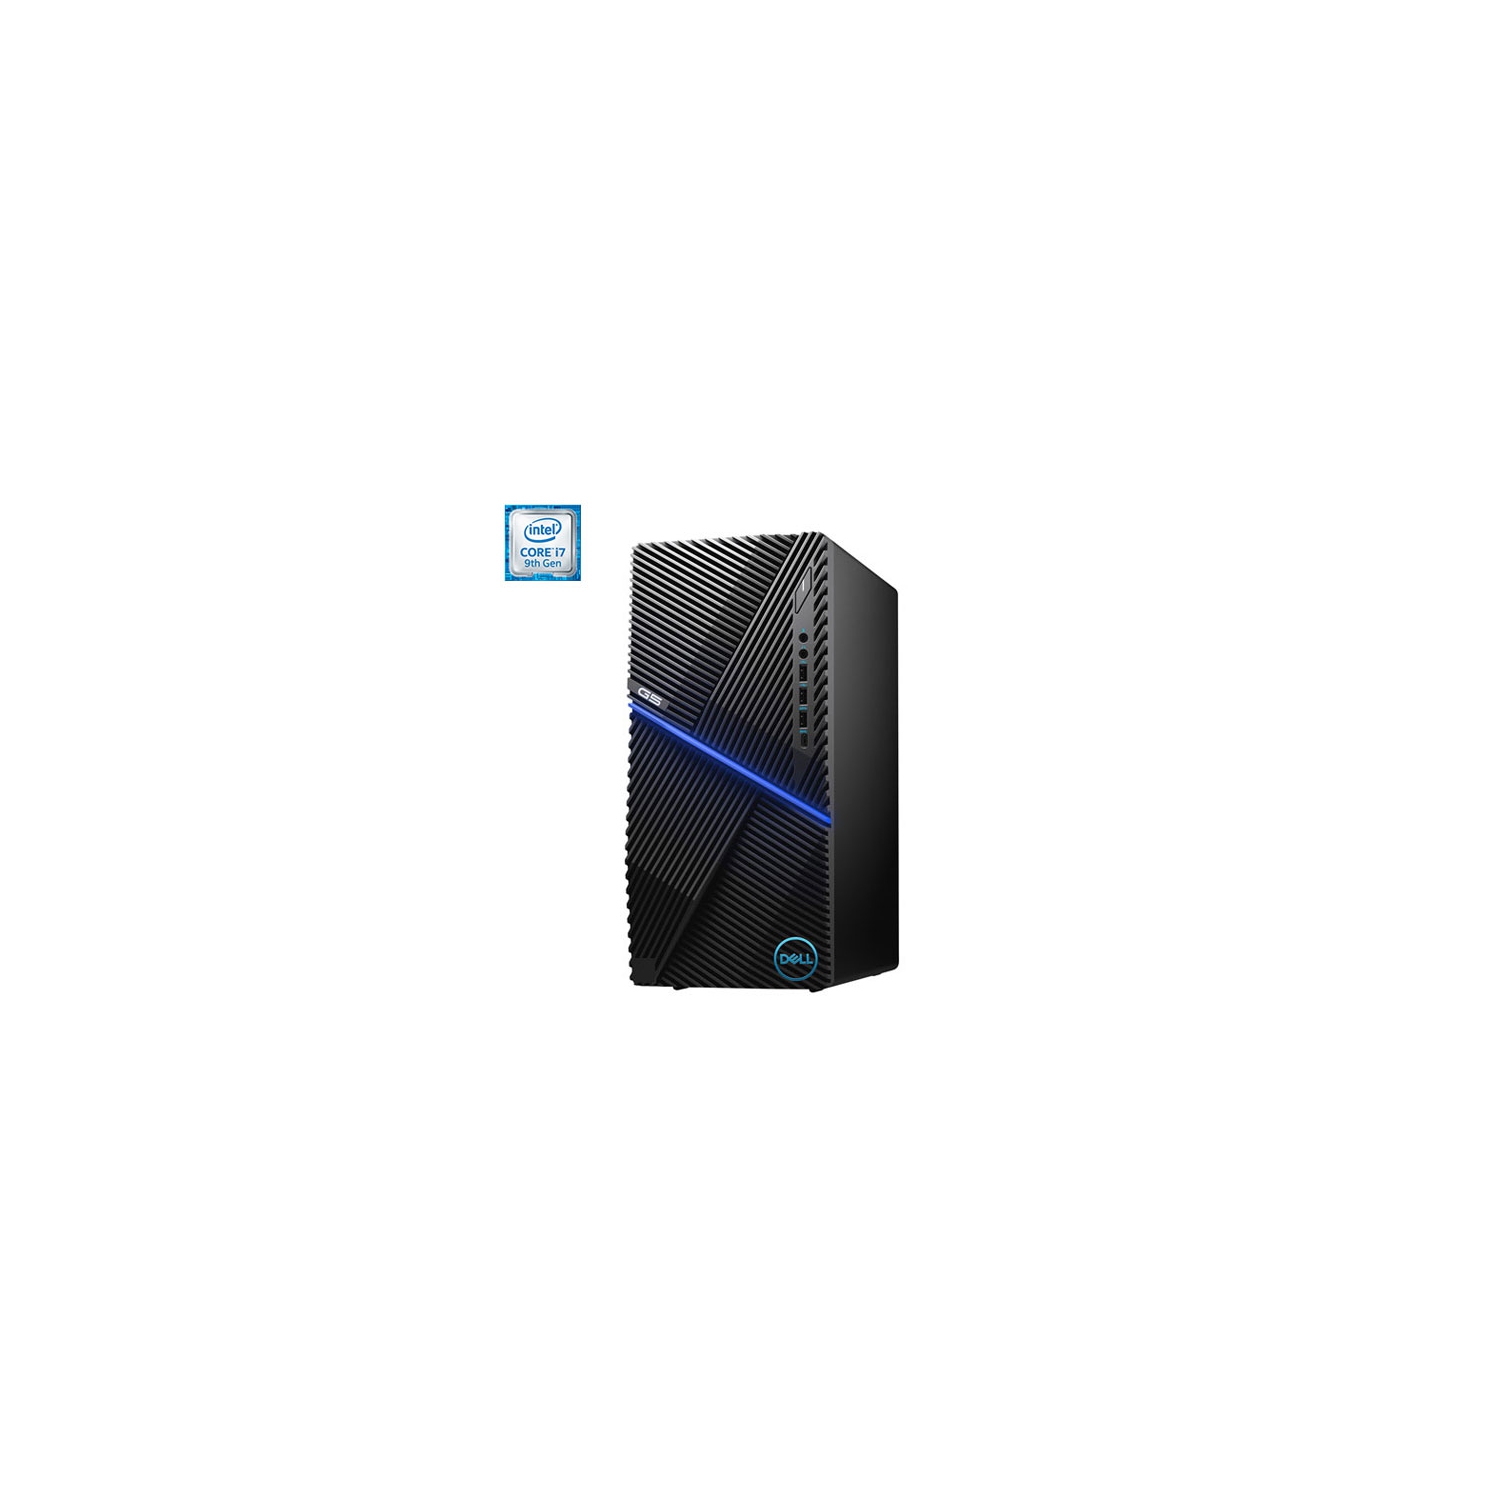 Refurbished(Excellent) - Dell G5 Gaming PC - Abyss Grey (Intel Core i7 9700/512GB SSD/16GB RAM/GeForce RTX 2060)